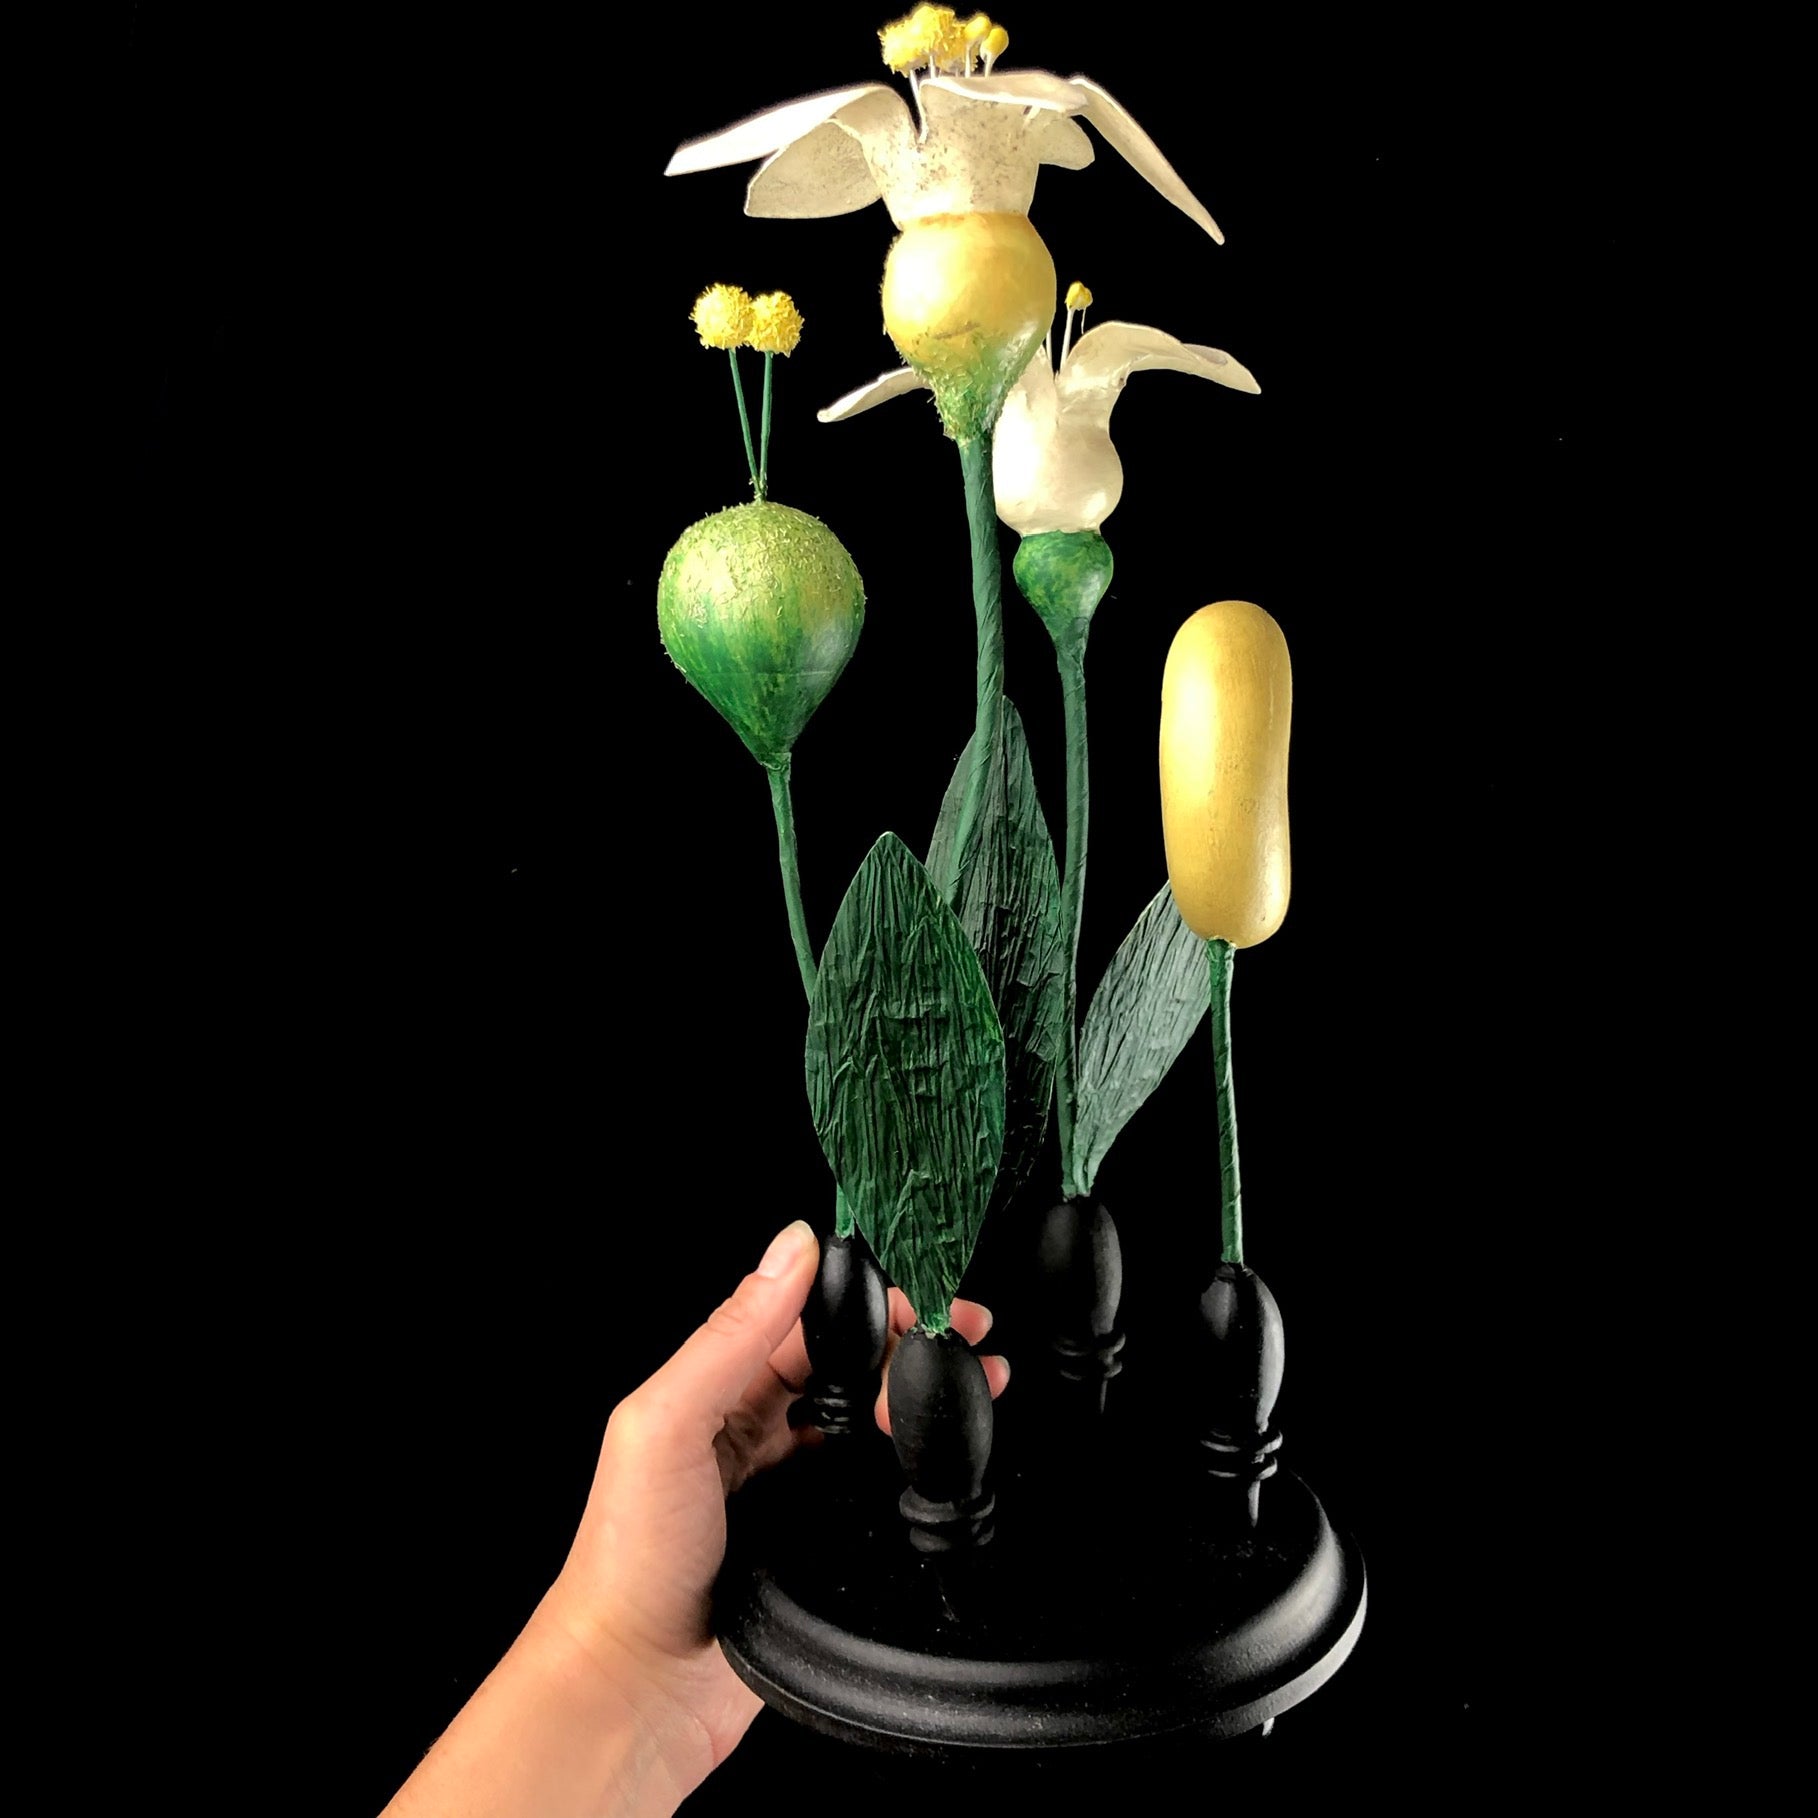 Side view of Bean Plant Study Model shown in hand